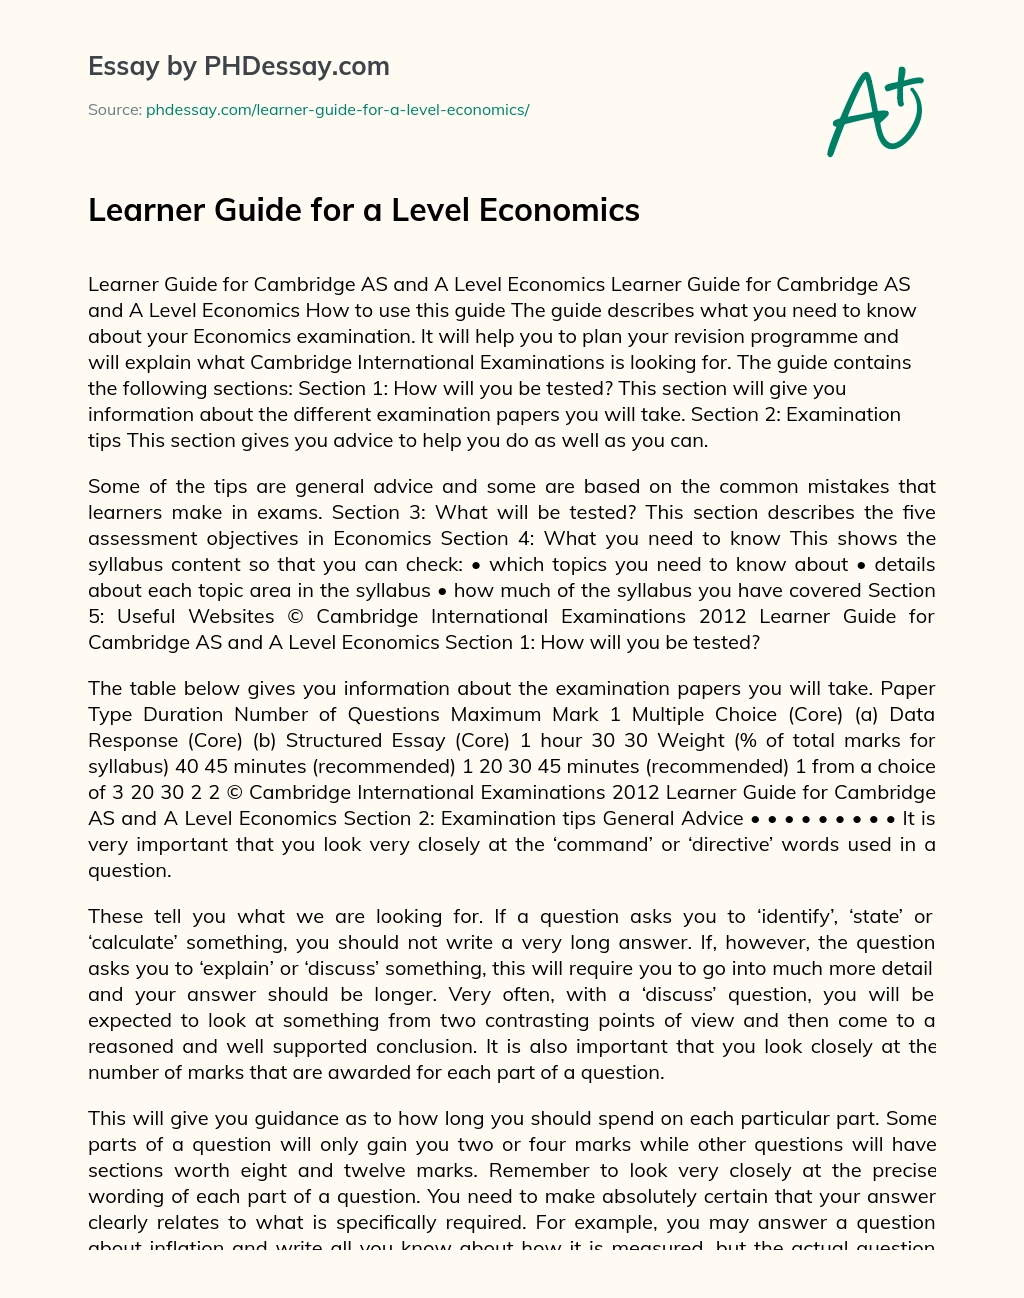 Learner Guide for a Level Economics essay